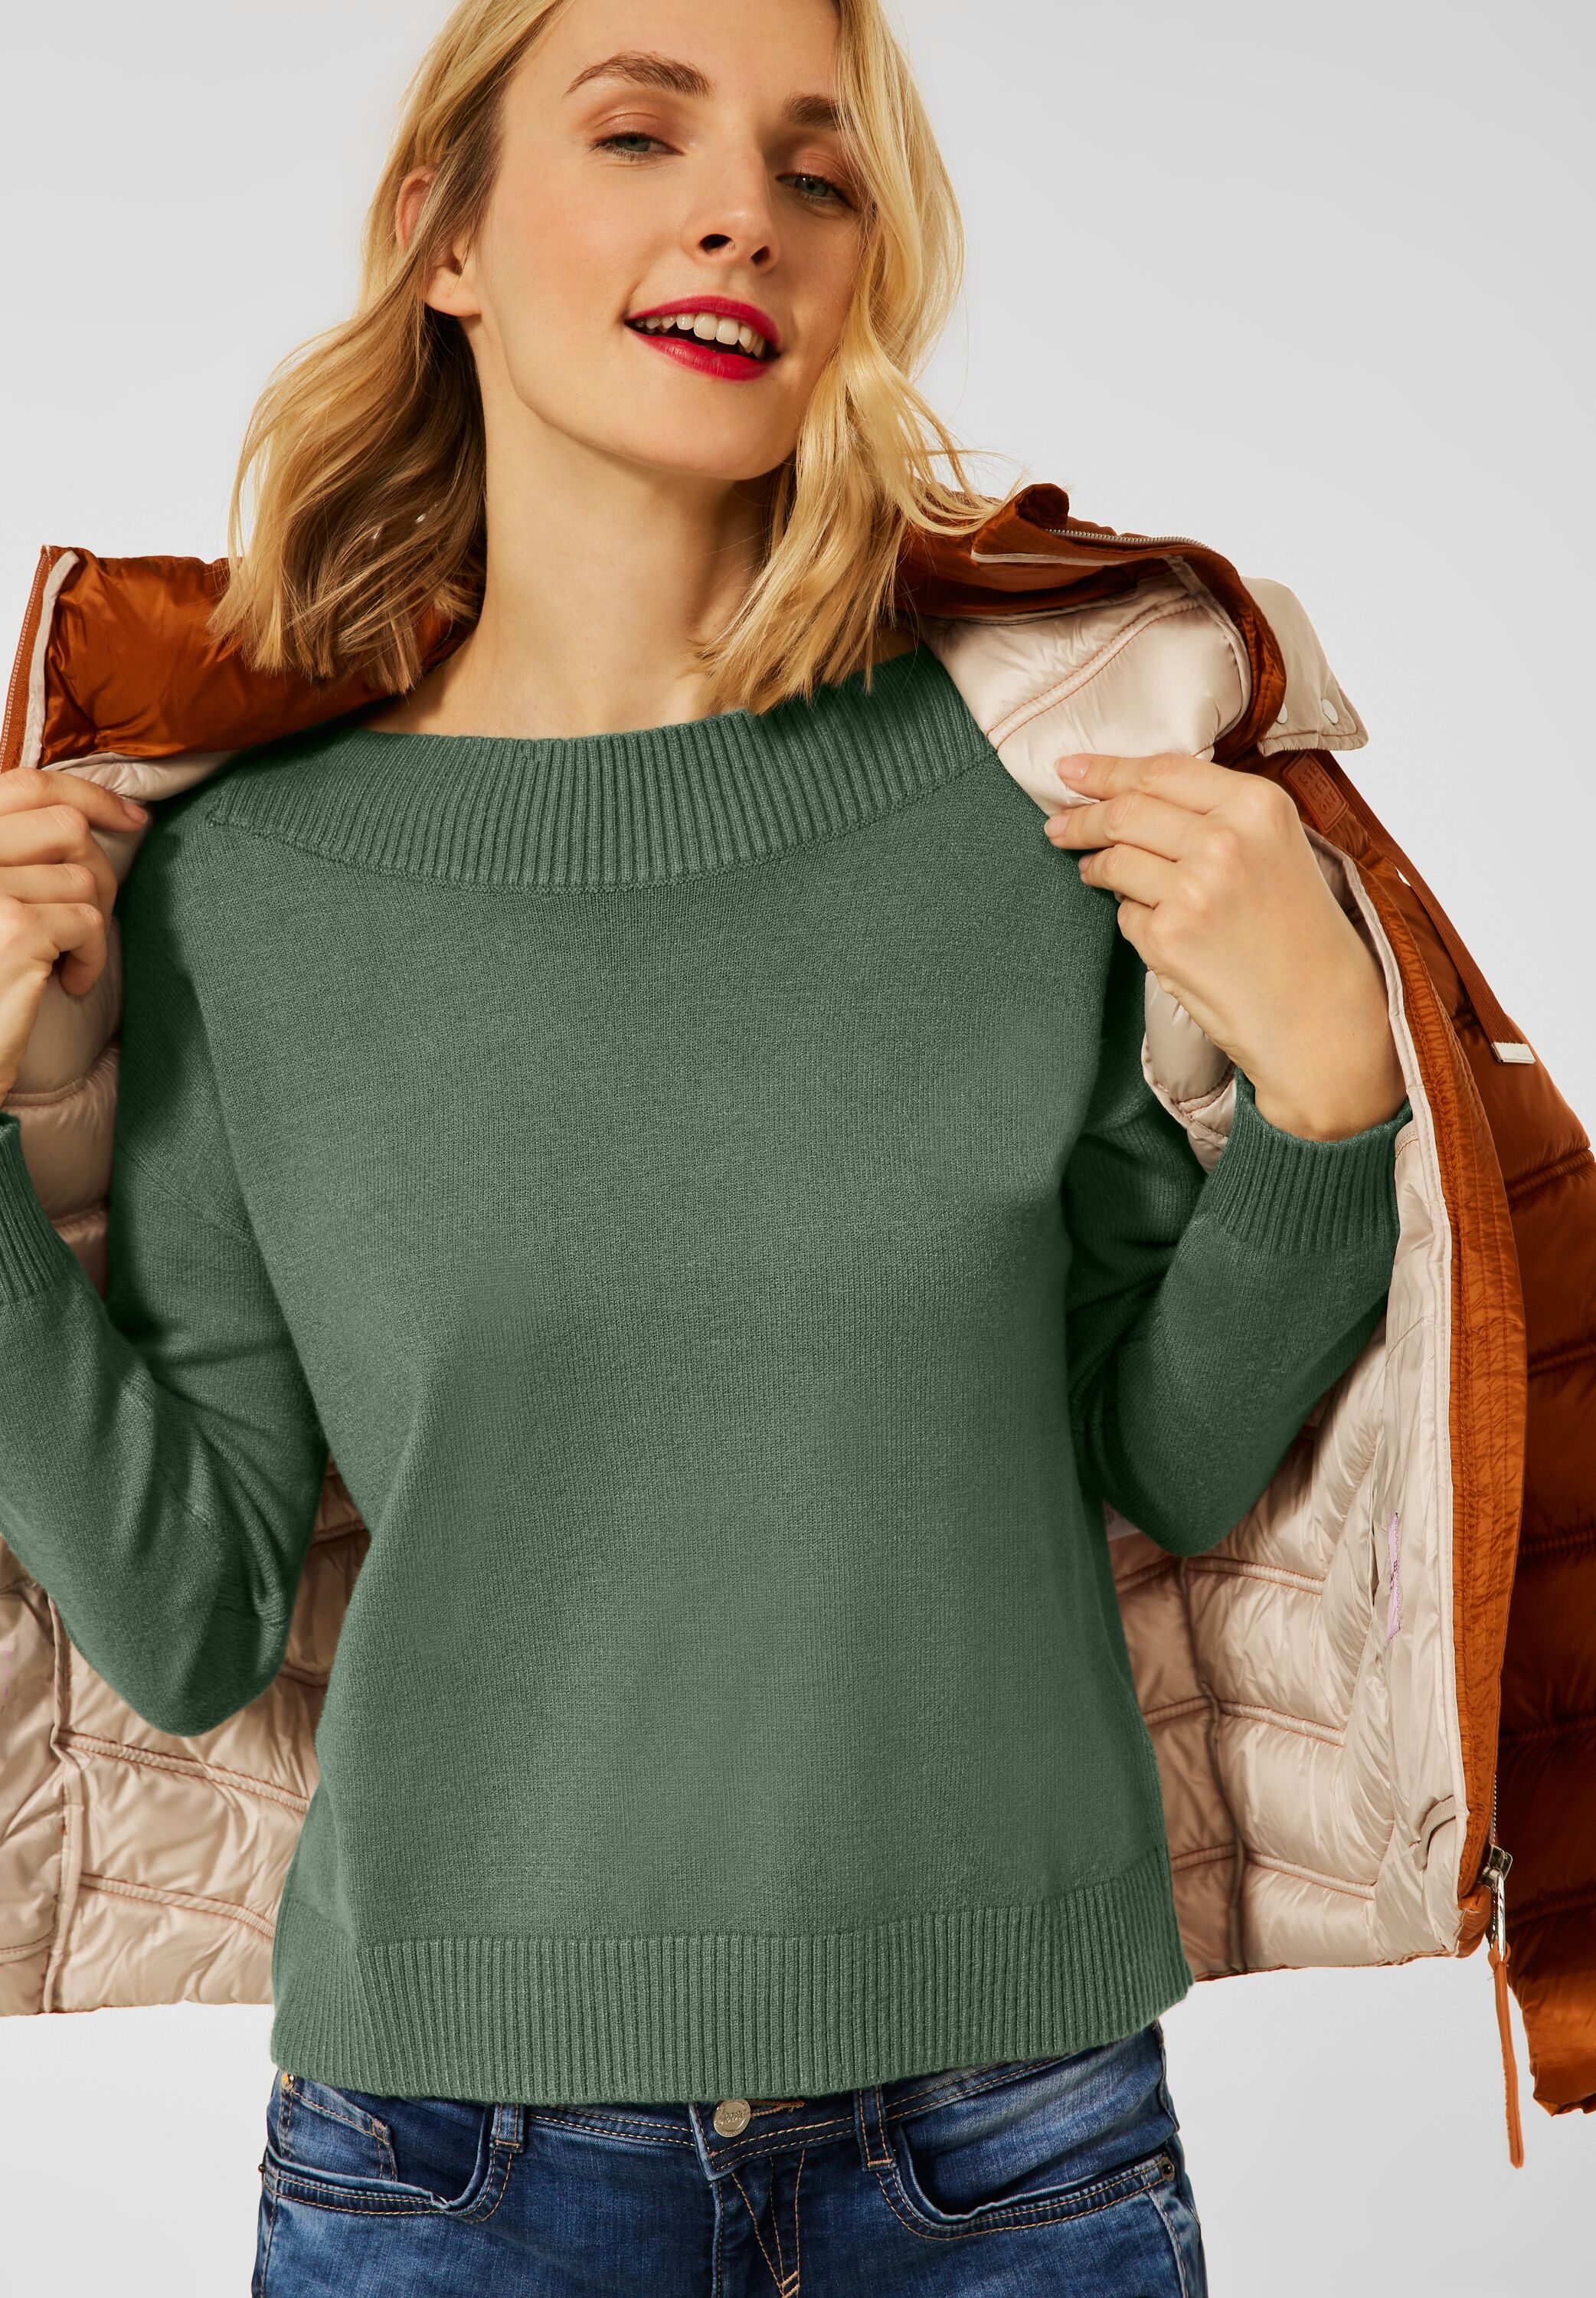 reduziert im Street One - CONCEPT Green in Pullover Mode SALE A301352-13389 Frosty